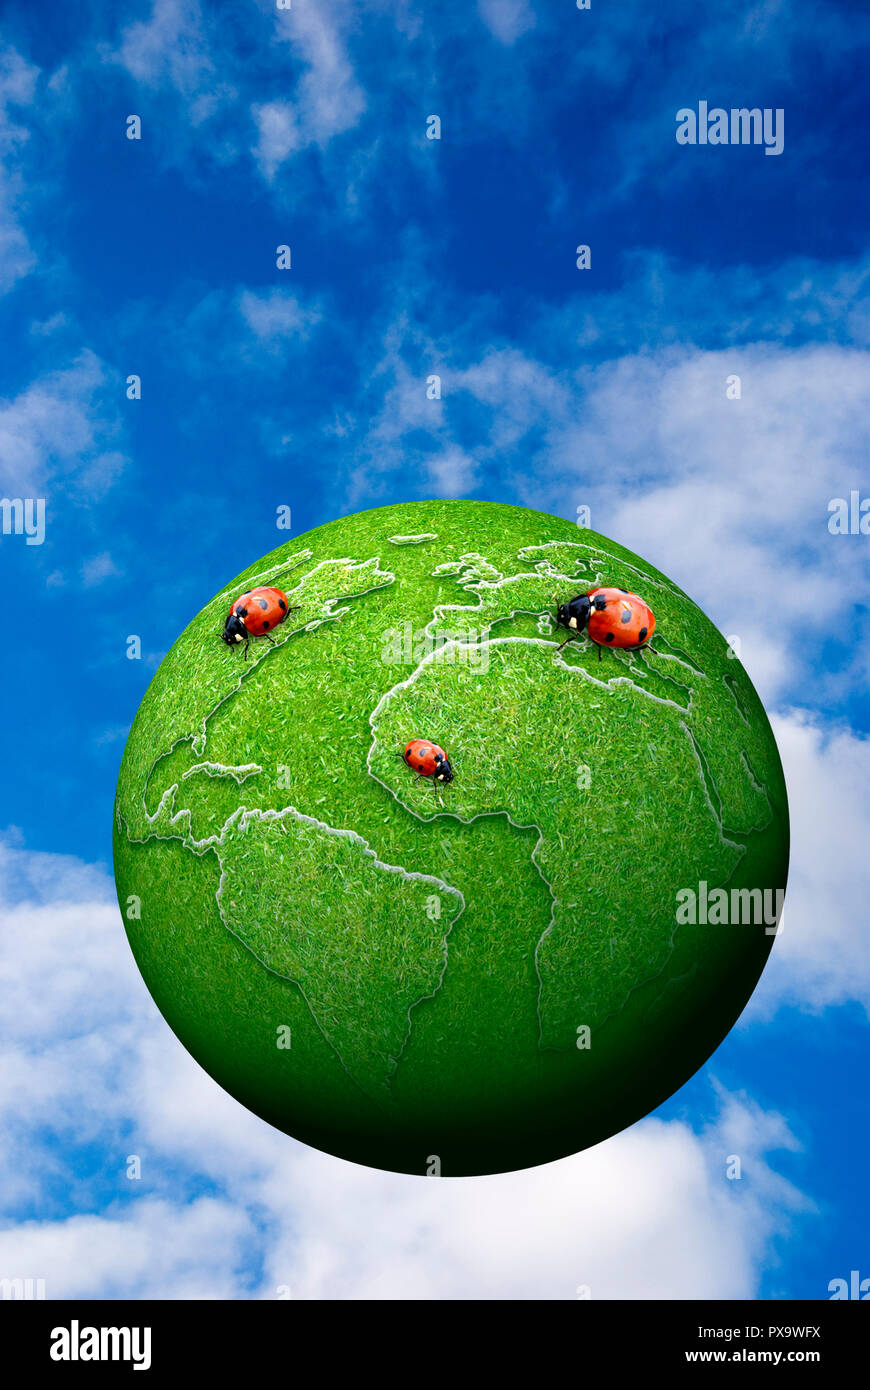 ladybugs on a green earth planet, environment protection concept Stock Photo